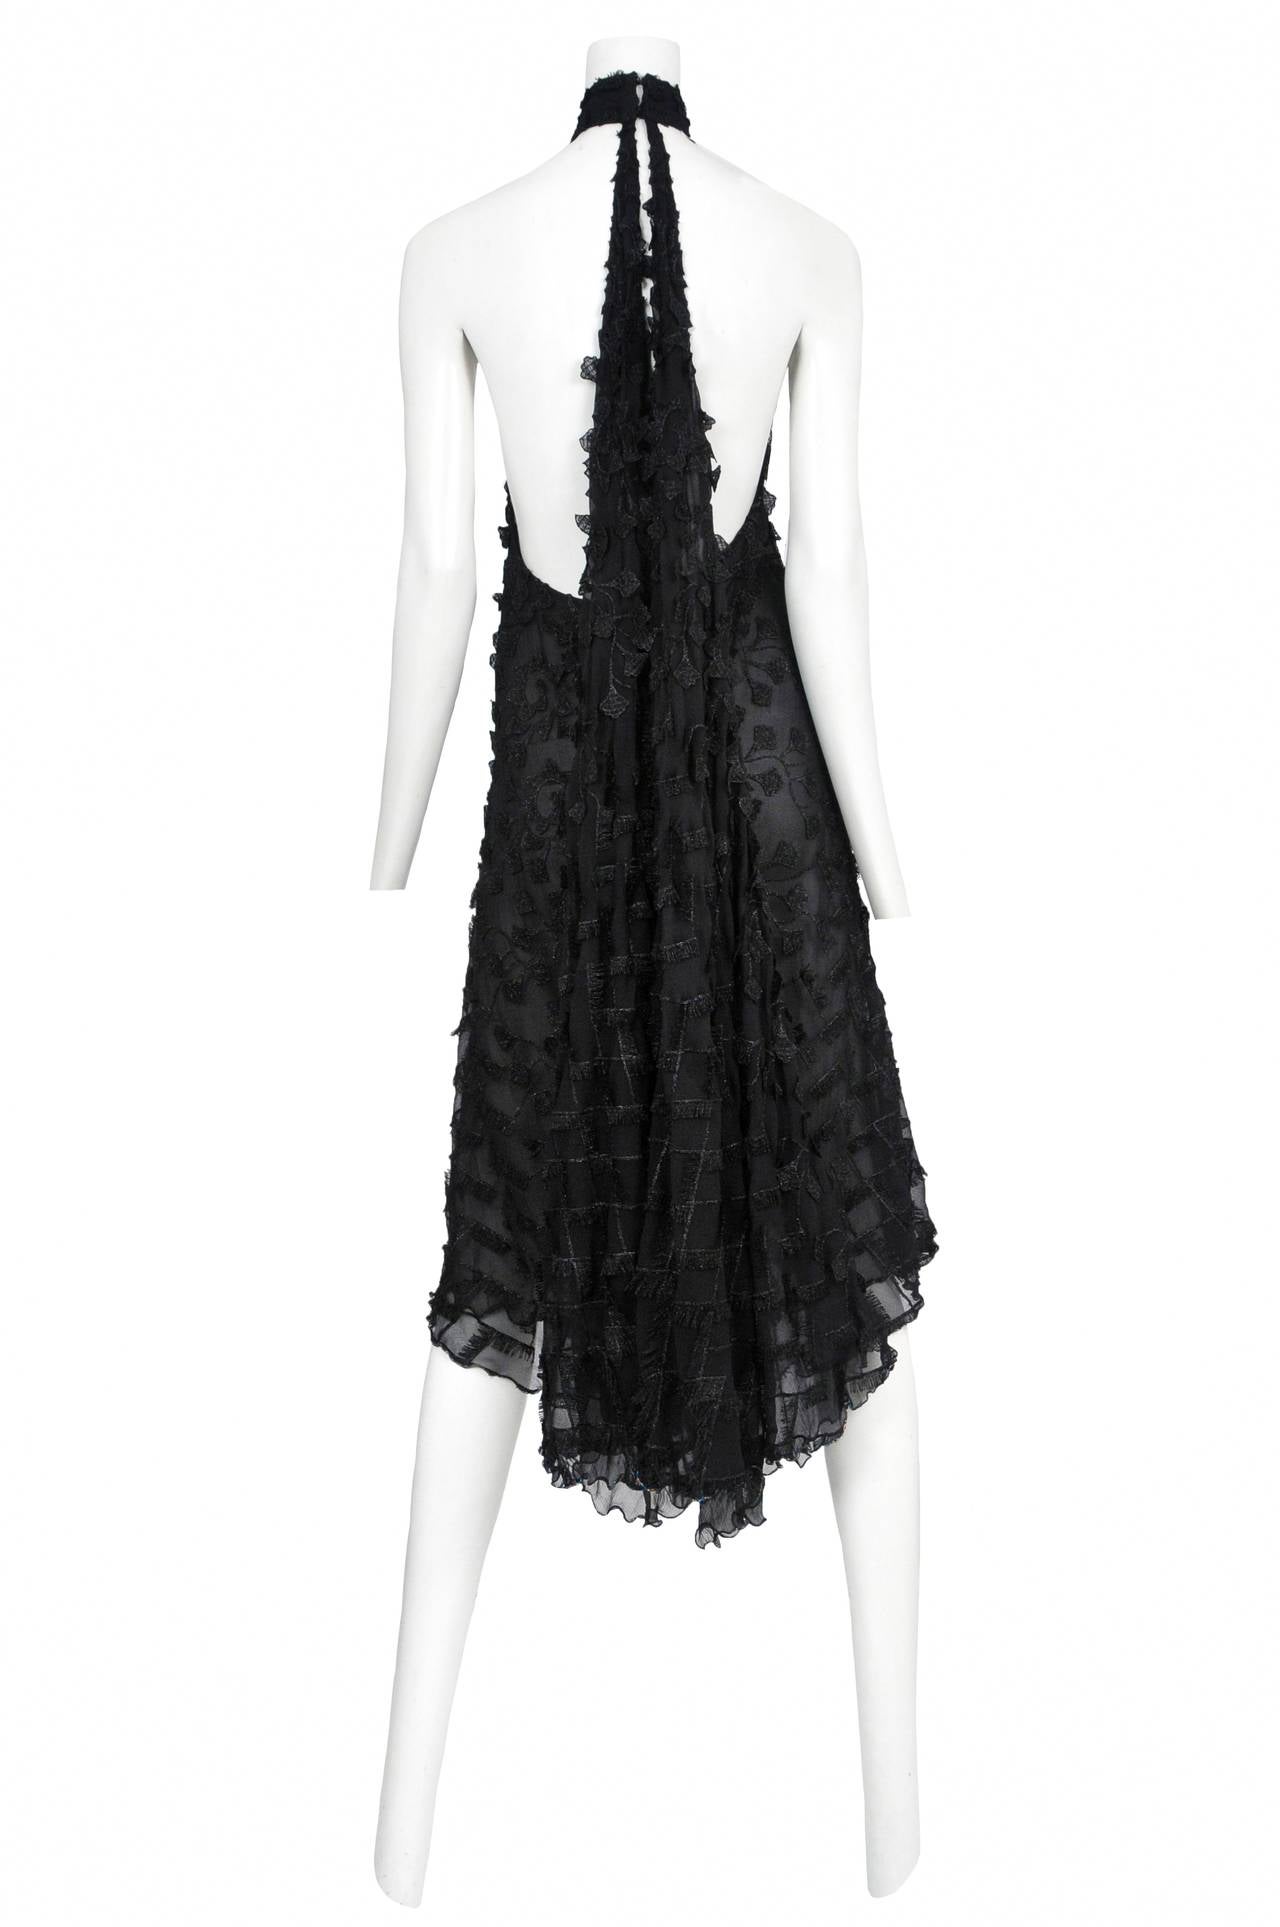 Black silk chiffon halter dress with lurex embellishment throughout.  Attached chain detail at front and cape attachment on back.